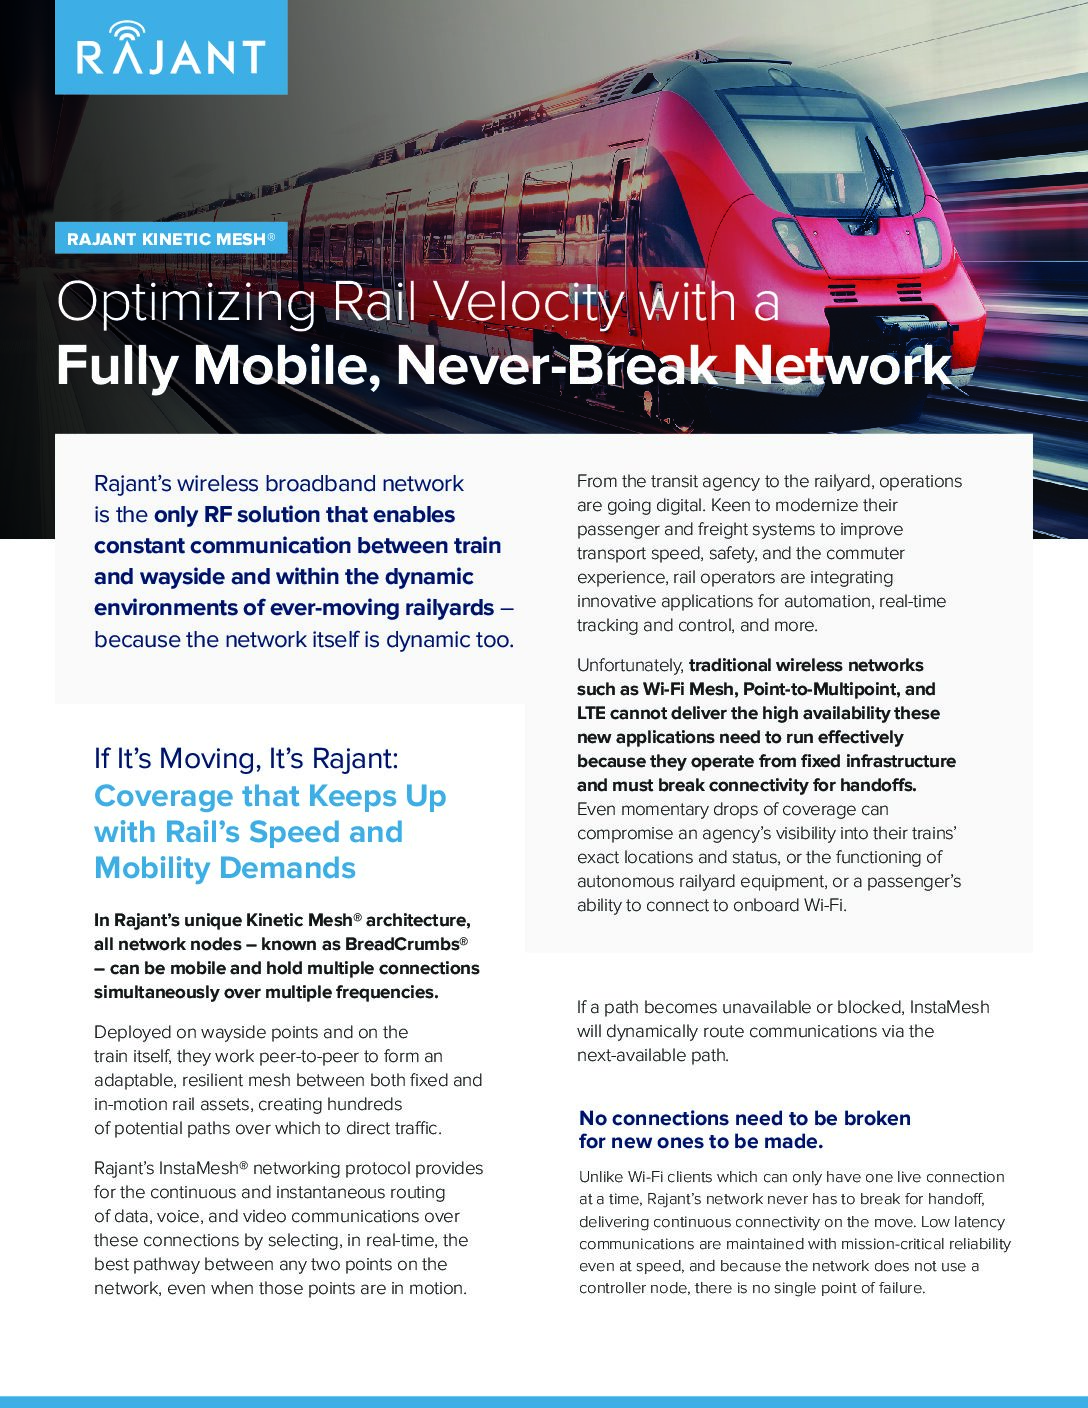 Optimizing Rail Velocity with a Fully Mobile, Never-Break Network